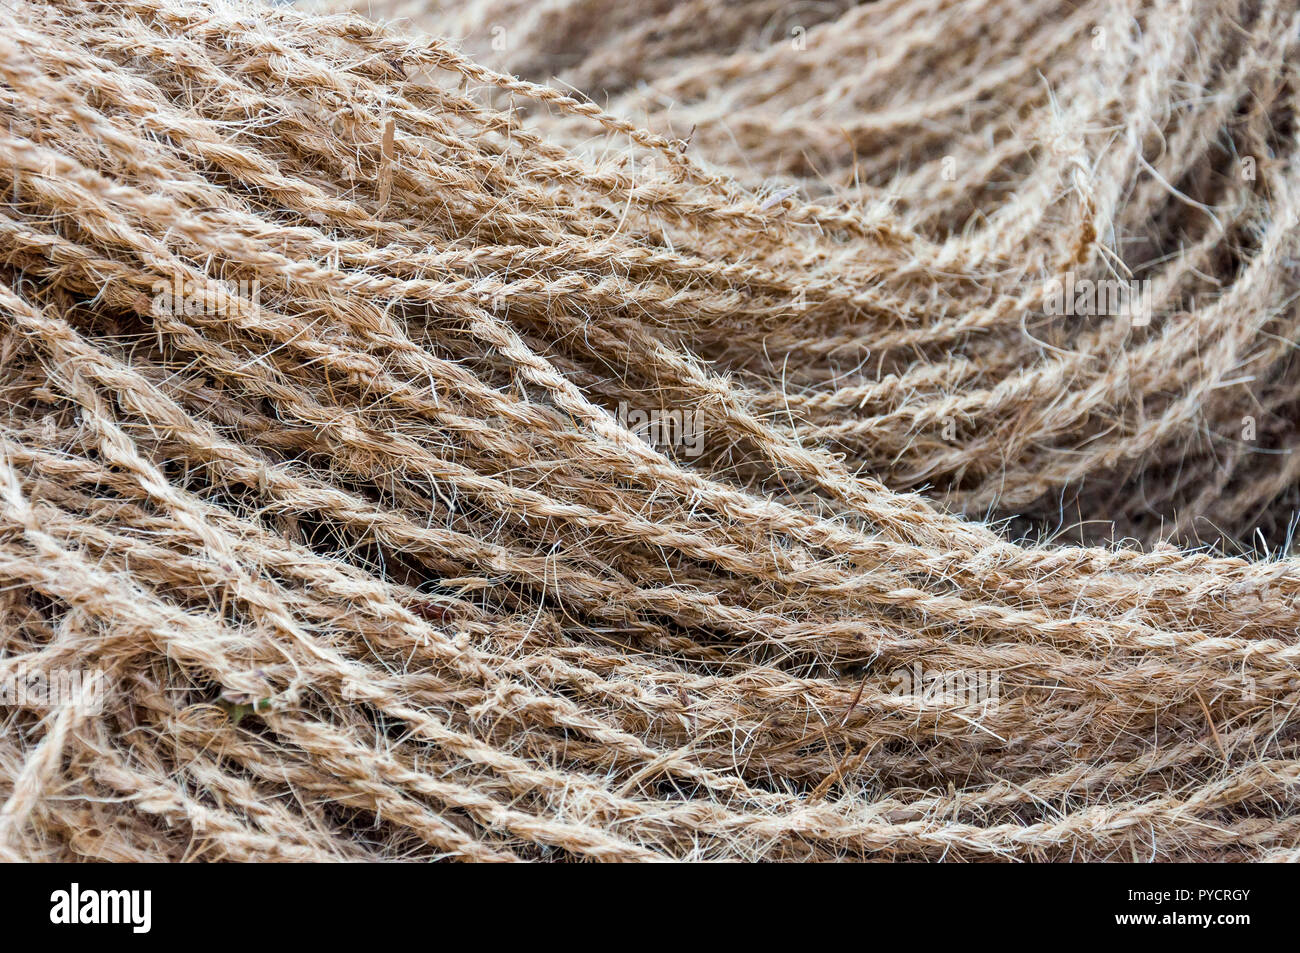 Here you can see the Indian handmade braided coconut rope that women in Kerala Backwaters made every day for many hundreds years. Stock Photo